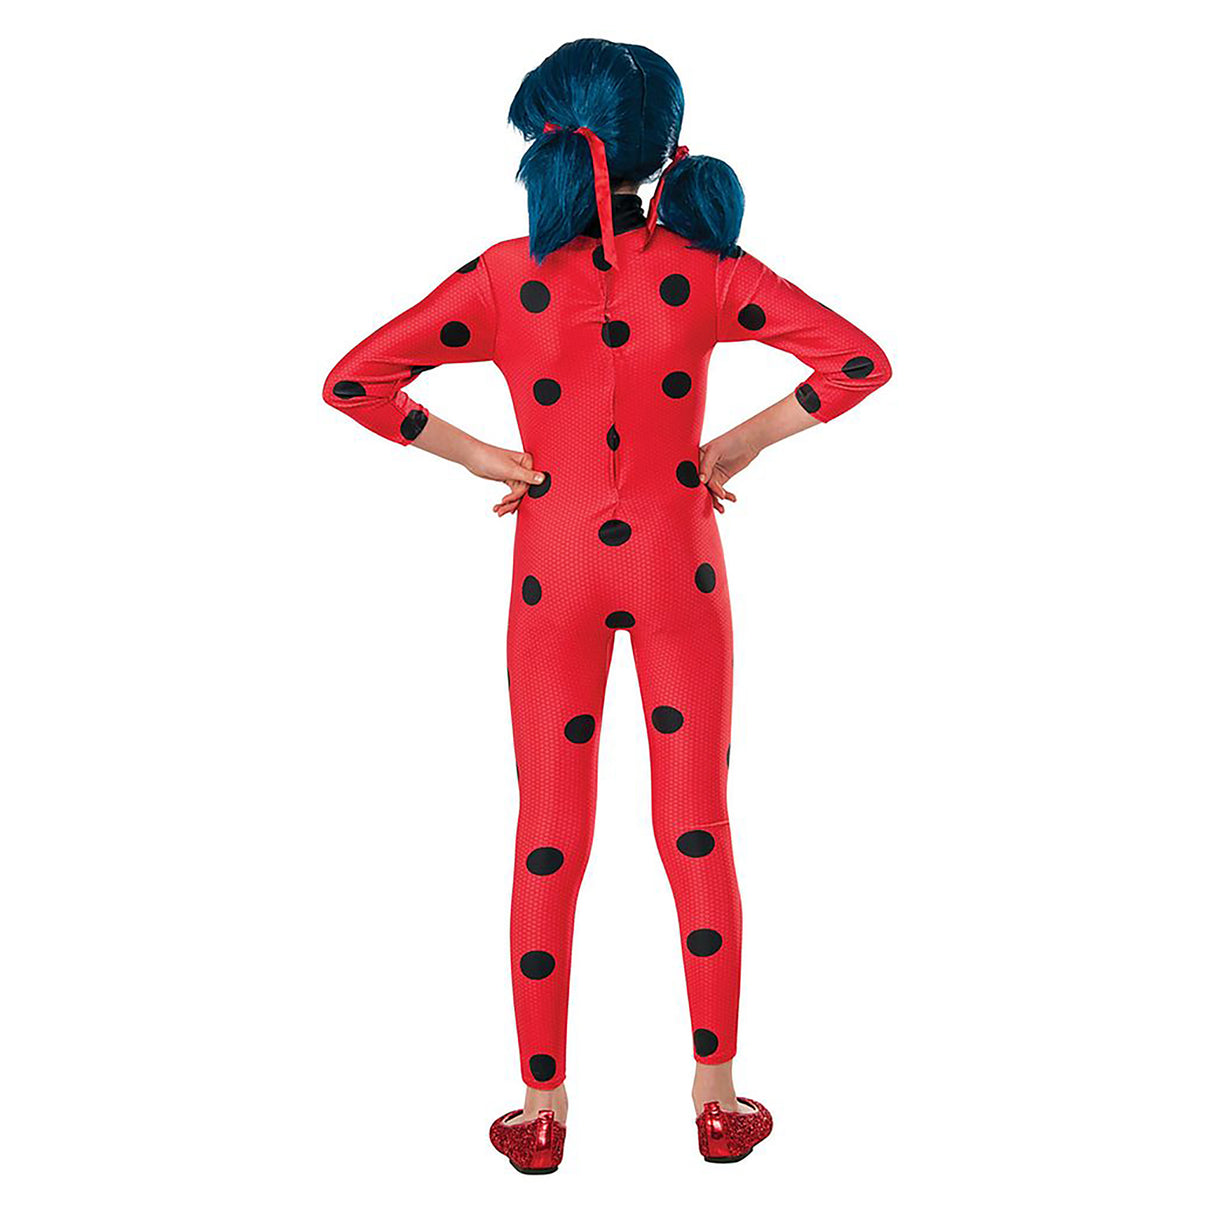 Rubies Zagtoons Miraculous: The Tales of Ladybug & Cat Noir Marinette Costume, Red (3-5 years)